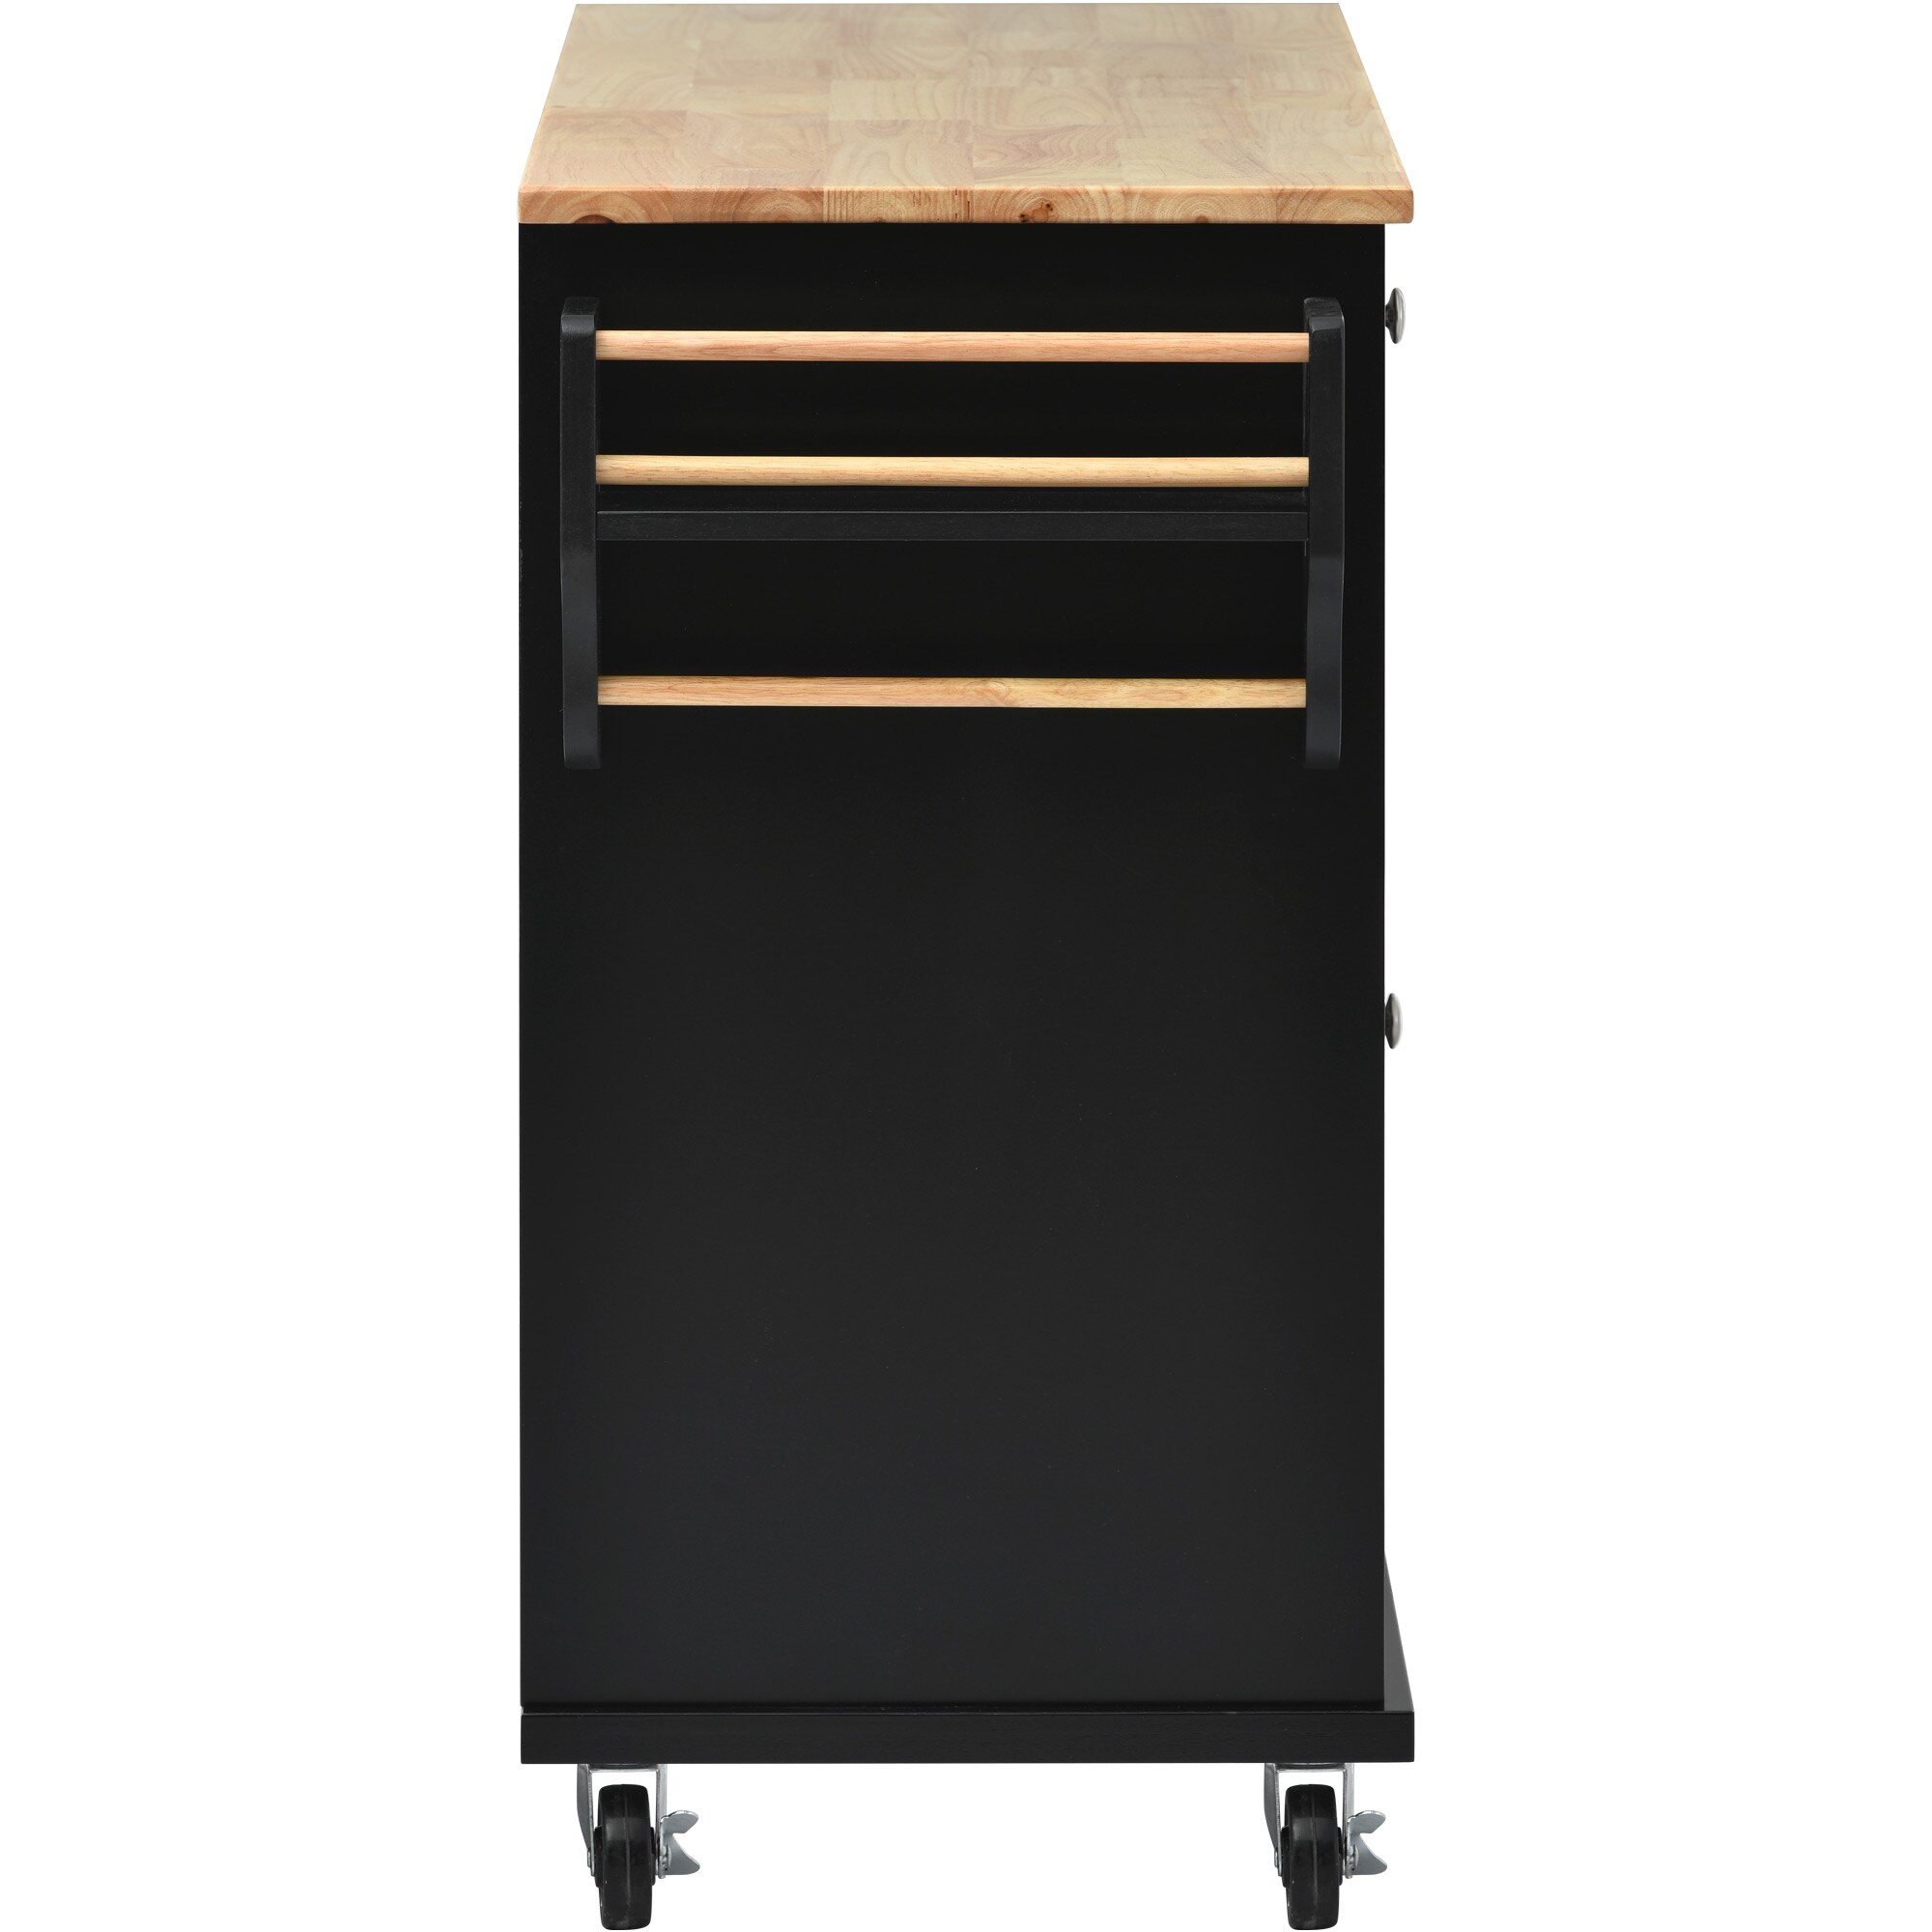 Rolling Mobile kitchen Island with 5 Draws and Adjustable Shelves